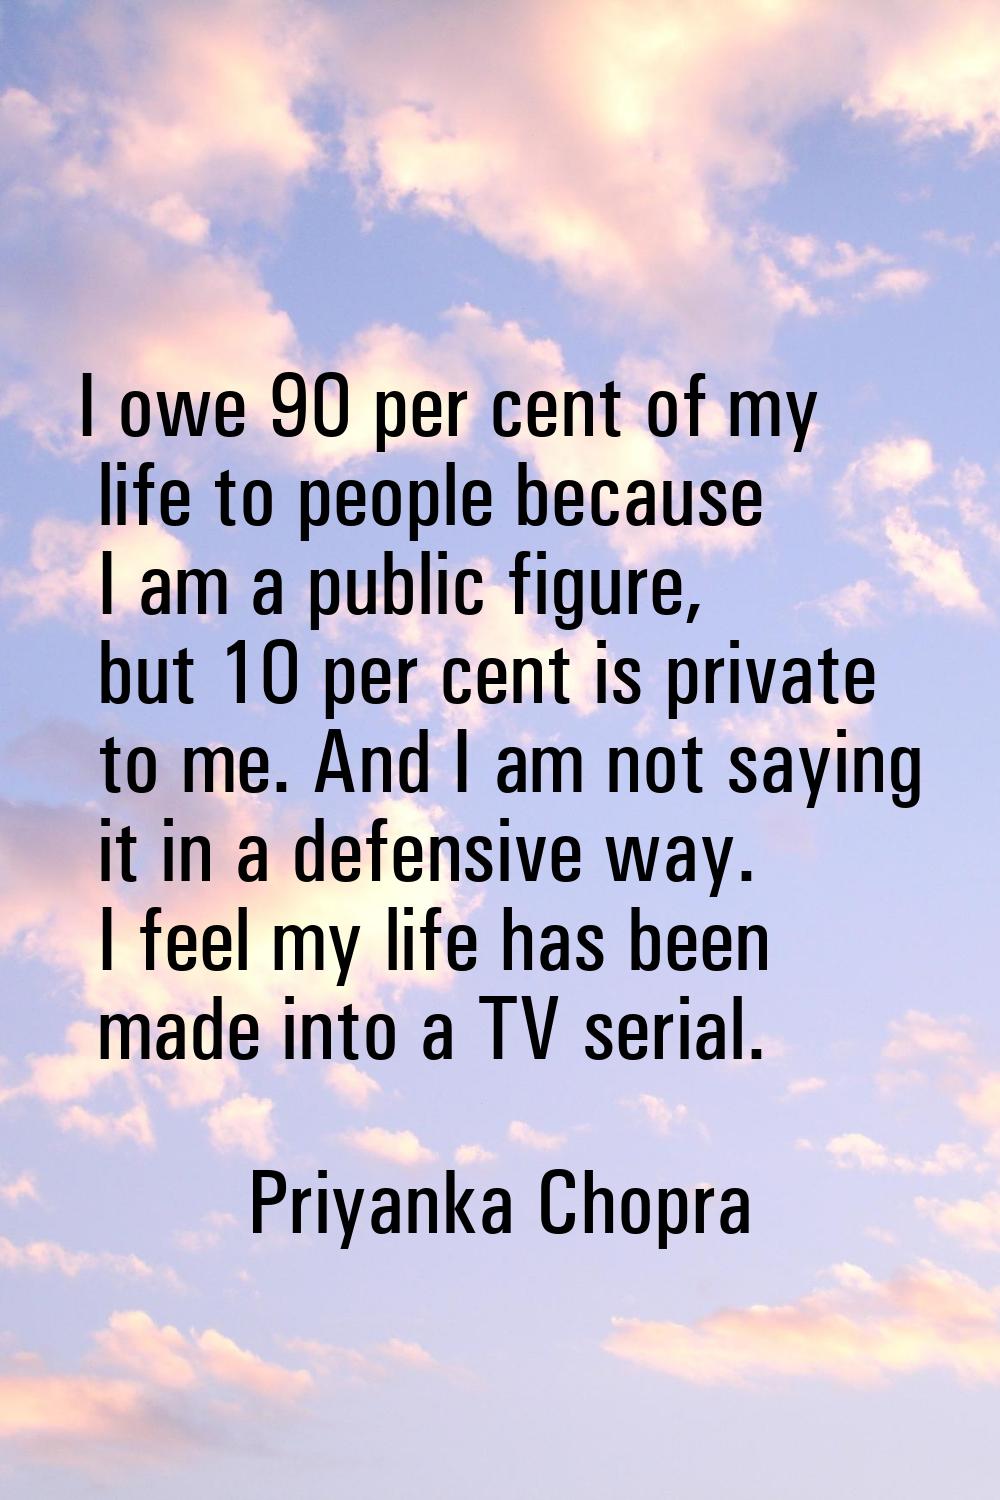 I owe 90 per cent of my life to people because I am a public figure, but 10 per cent is private to 